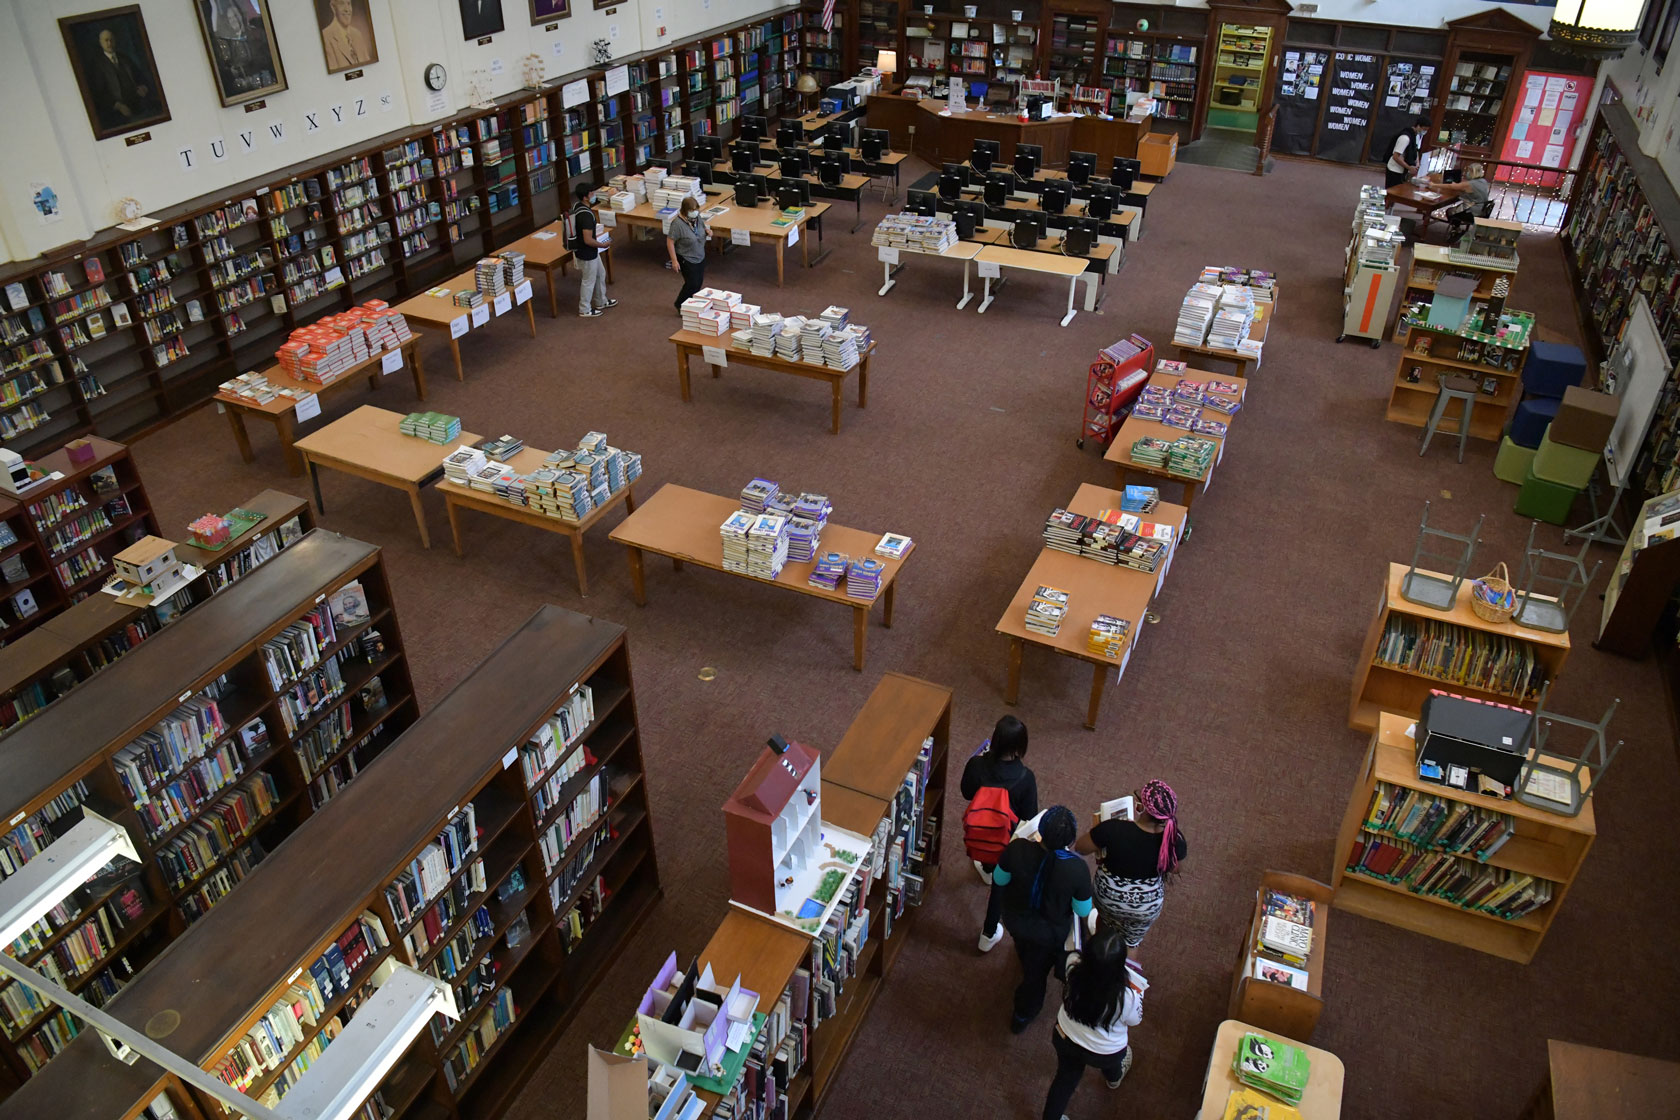 Photo shows an aerial view of a small group of students entering a library in a high school